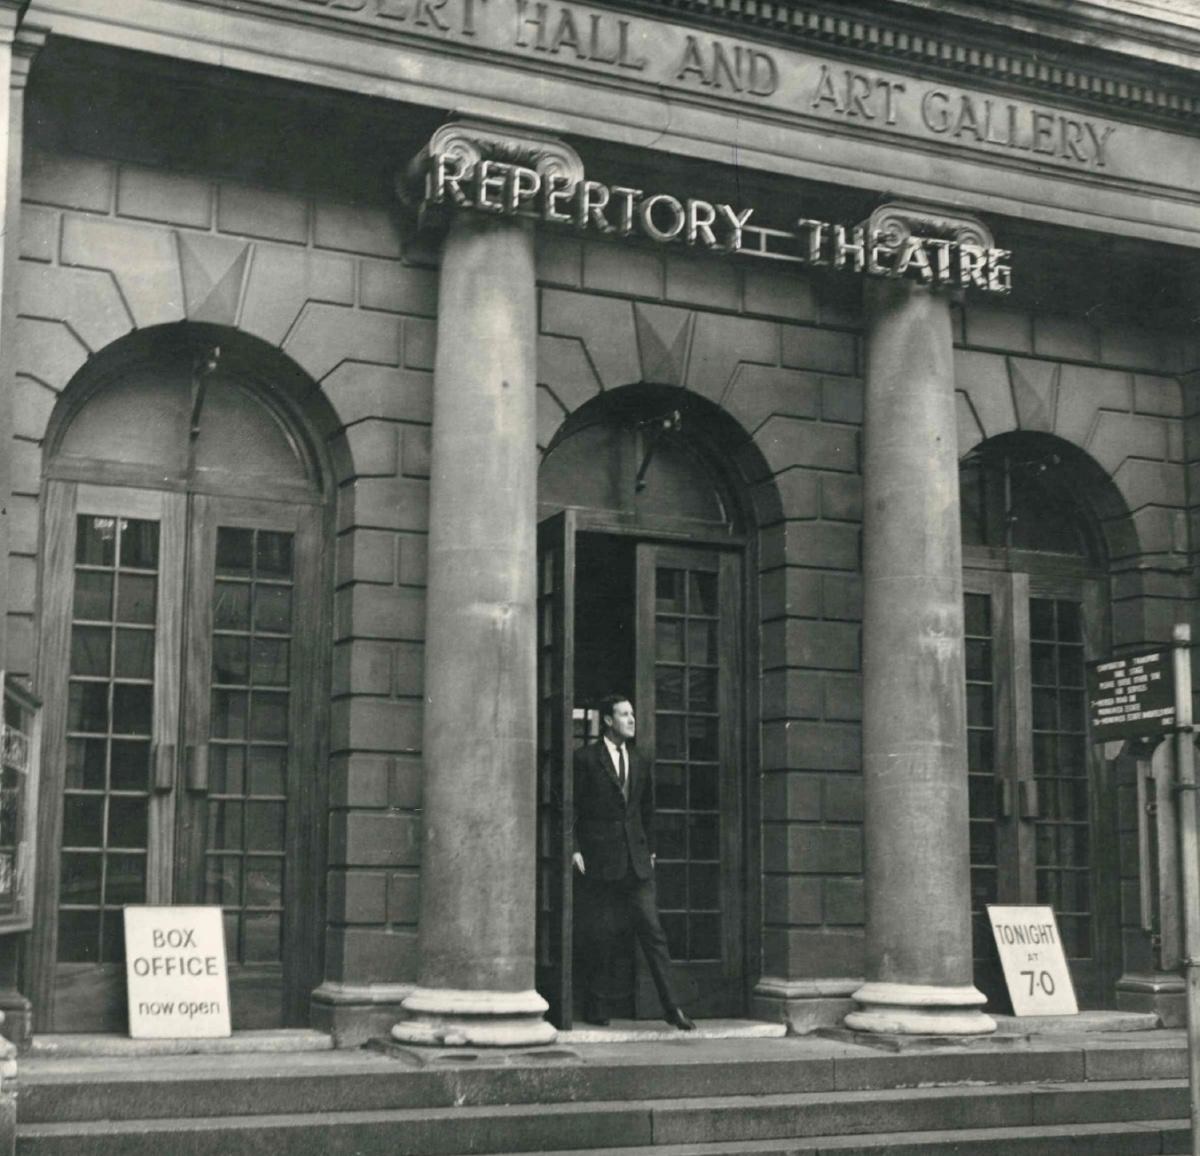 Gone - the theatre vacated the building in 1972 but the building is now the home of the Co-op Bank